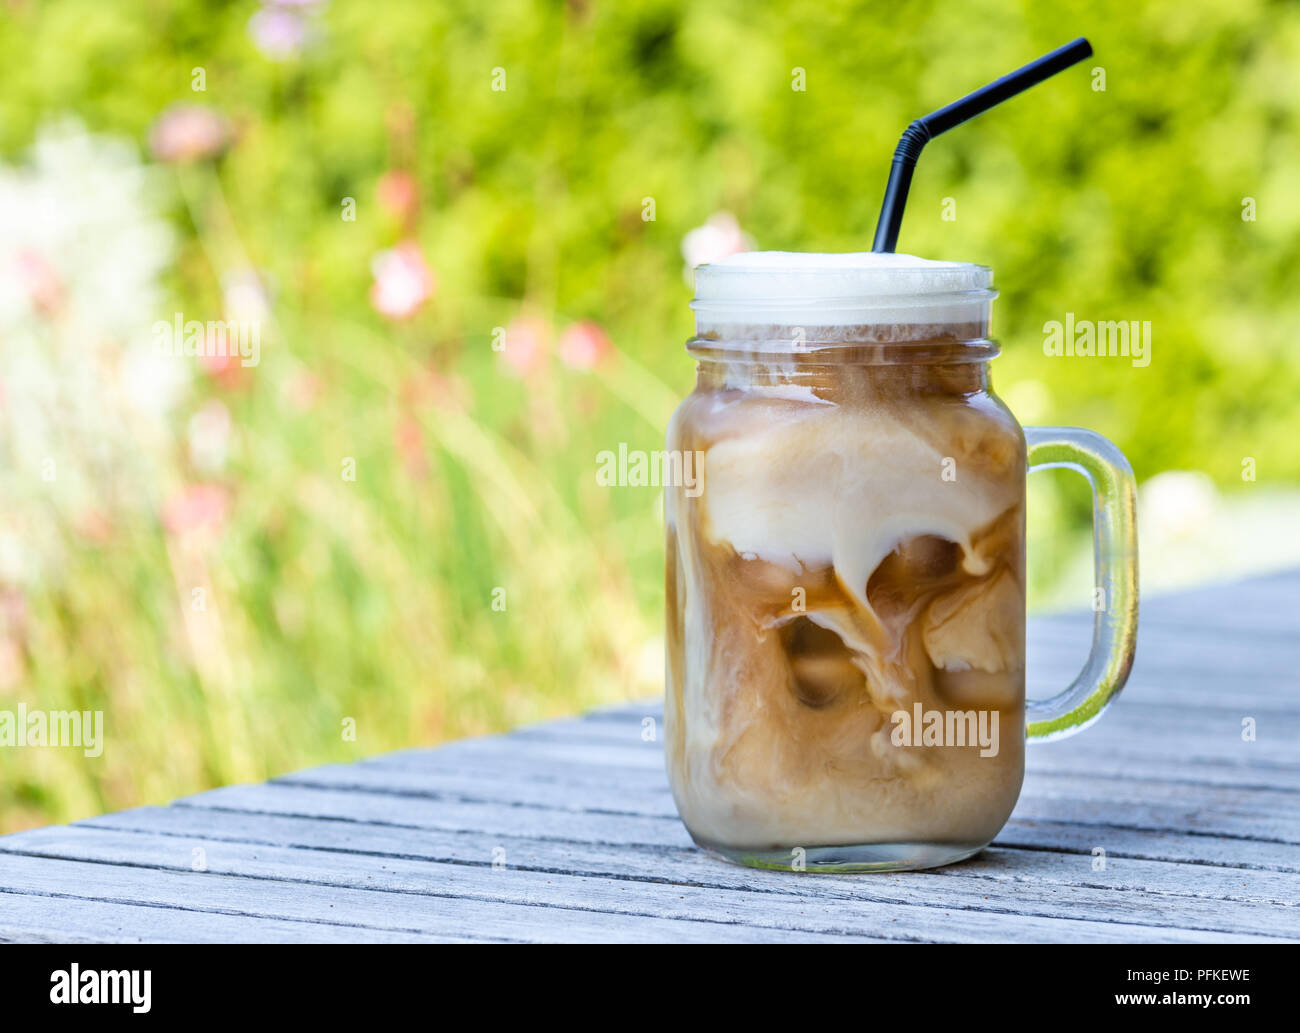 Ice coffee in glass mug with milk and cinnamon on wooden table in